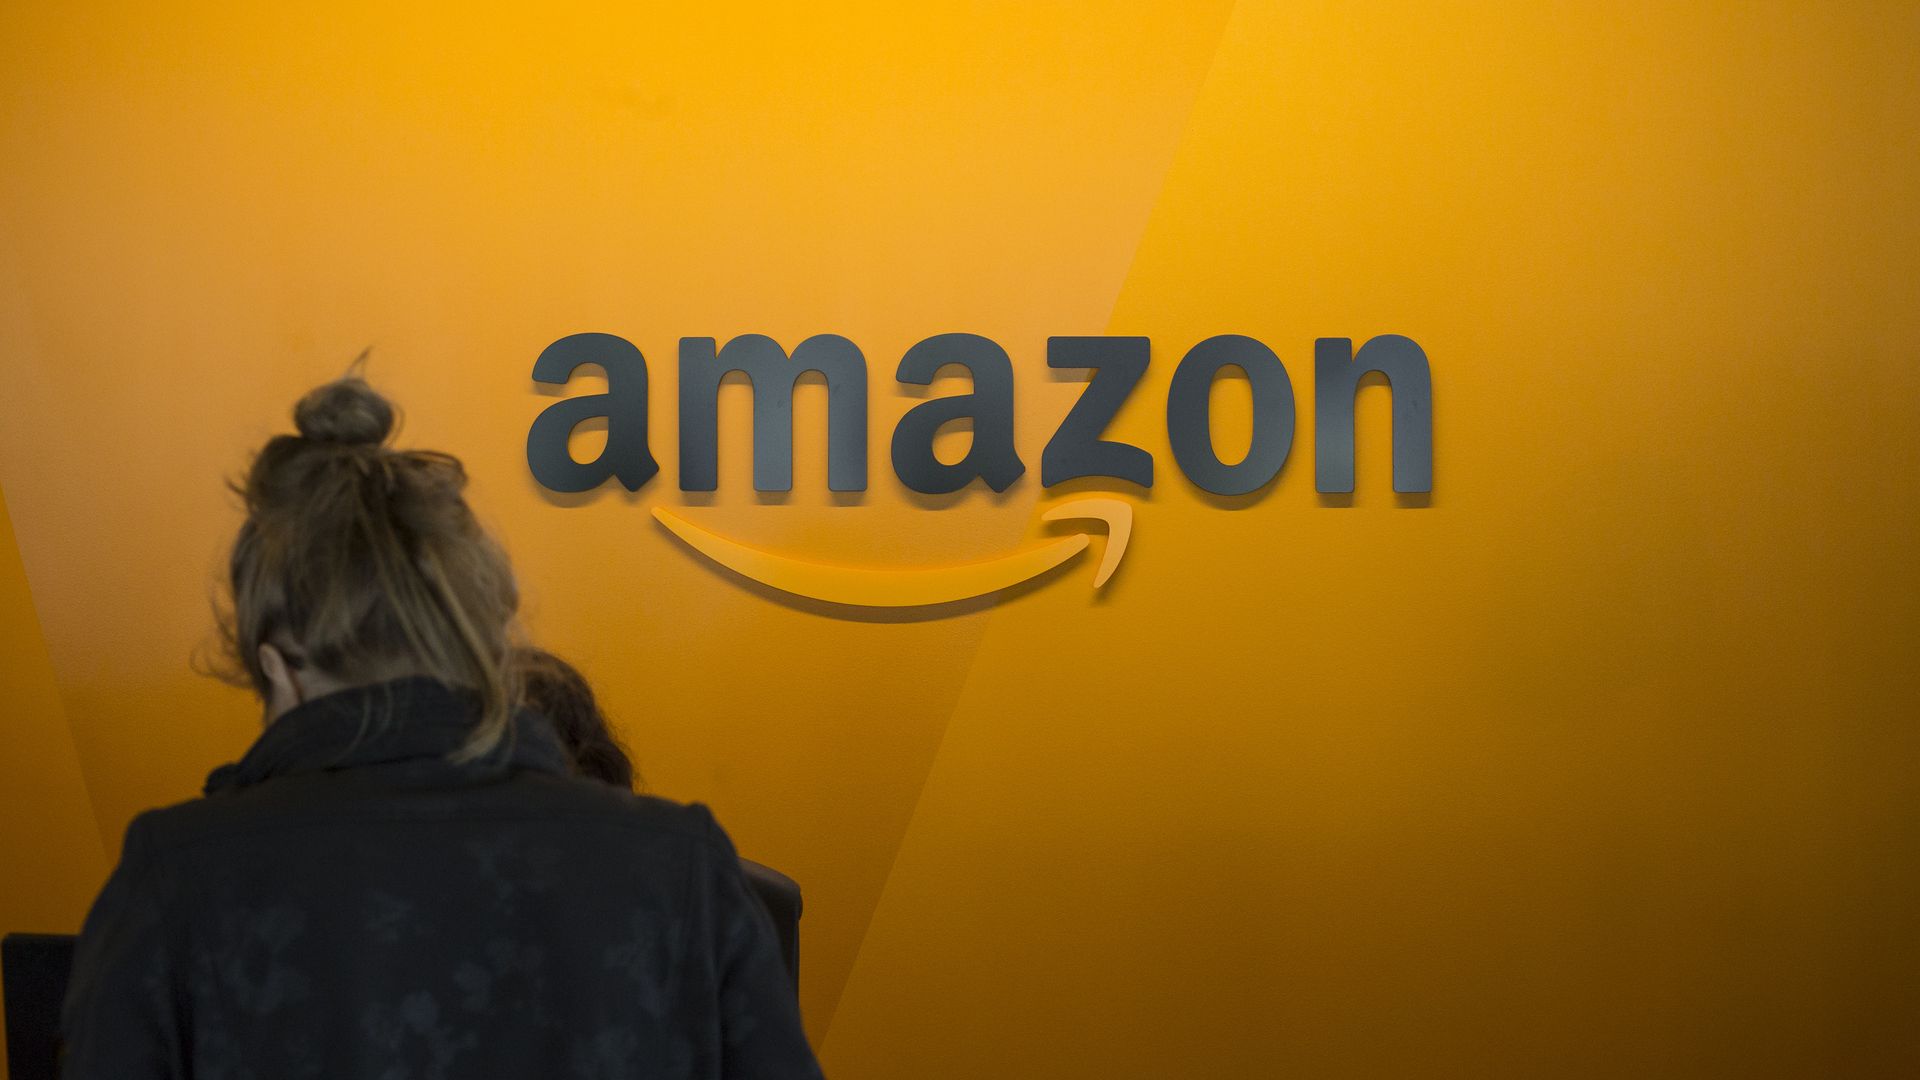 A woman walks in front of an orange wall with the Amazon.com logo on it